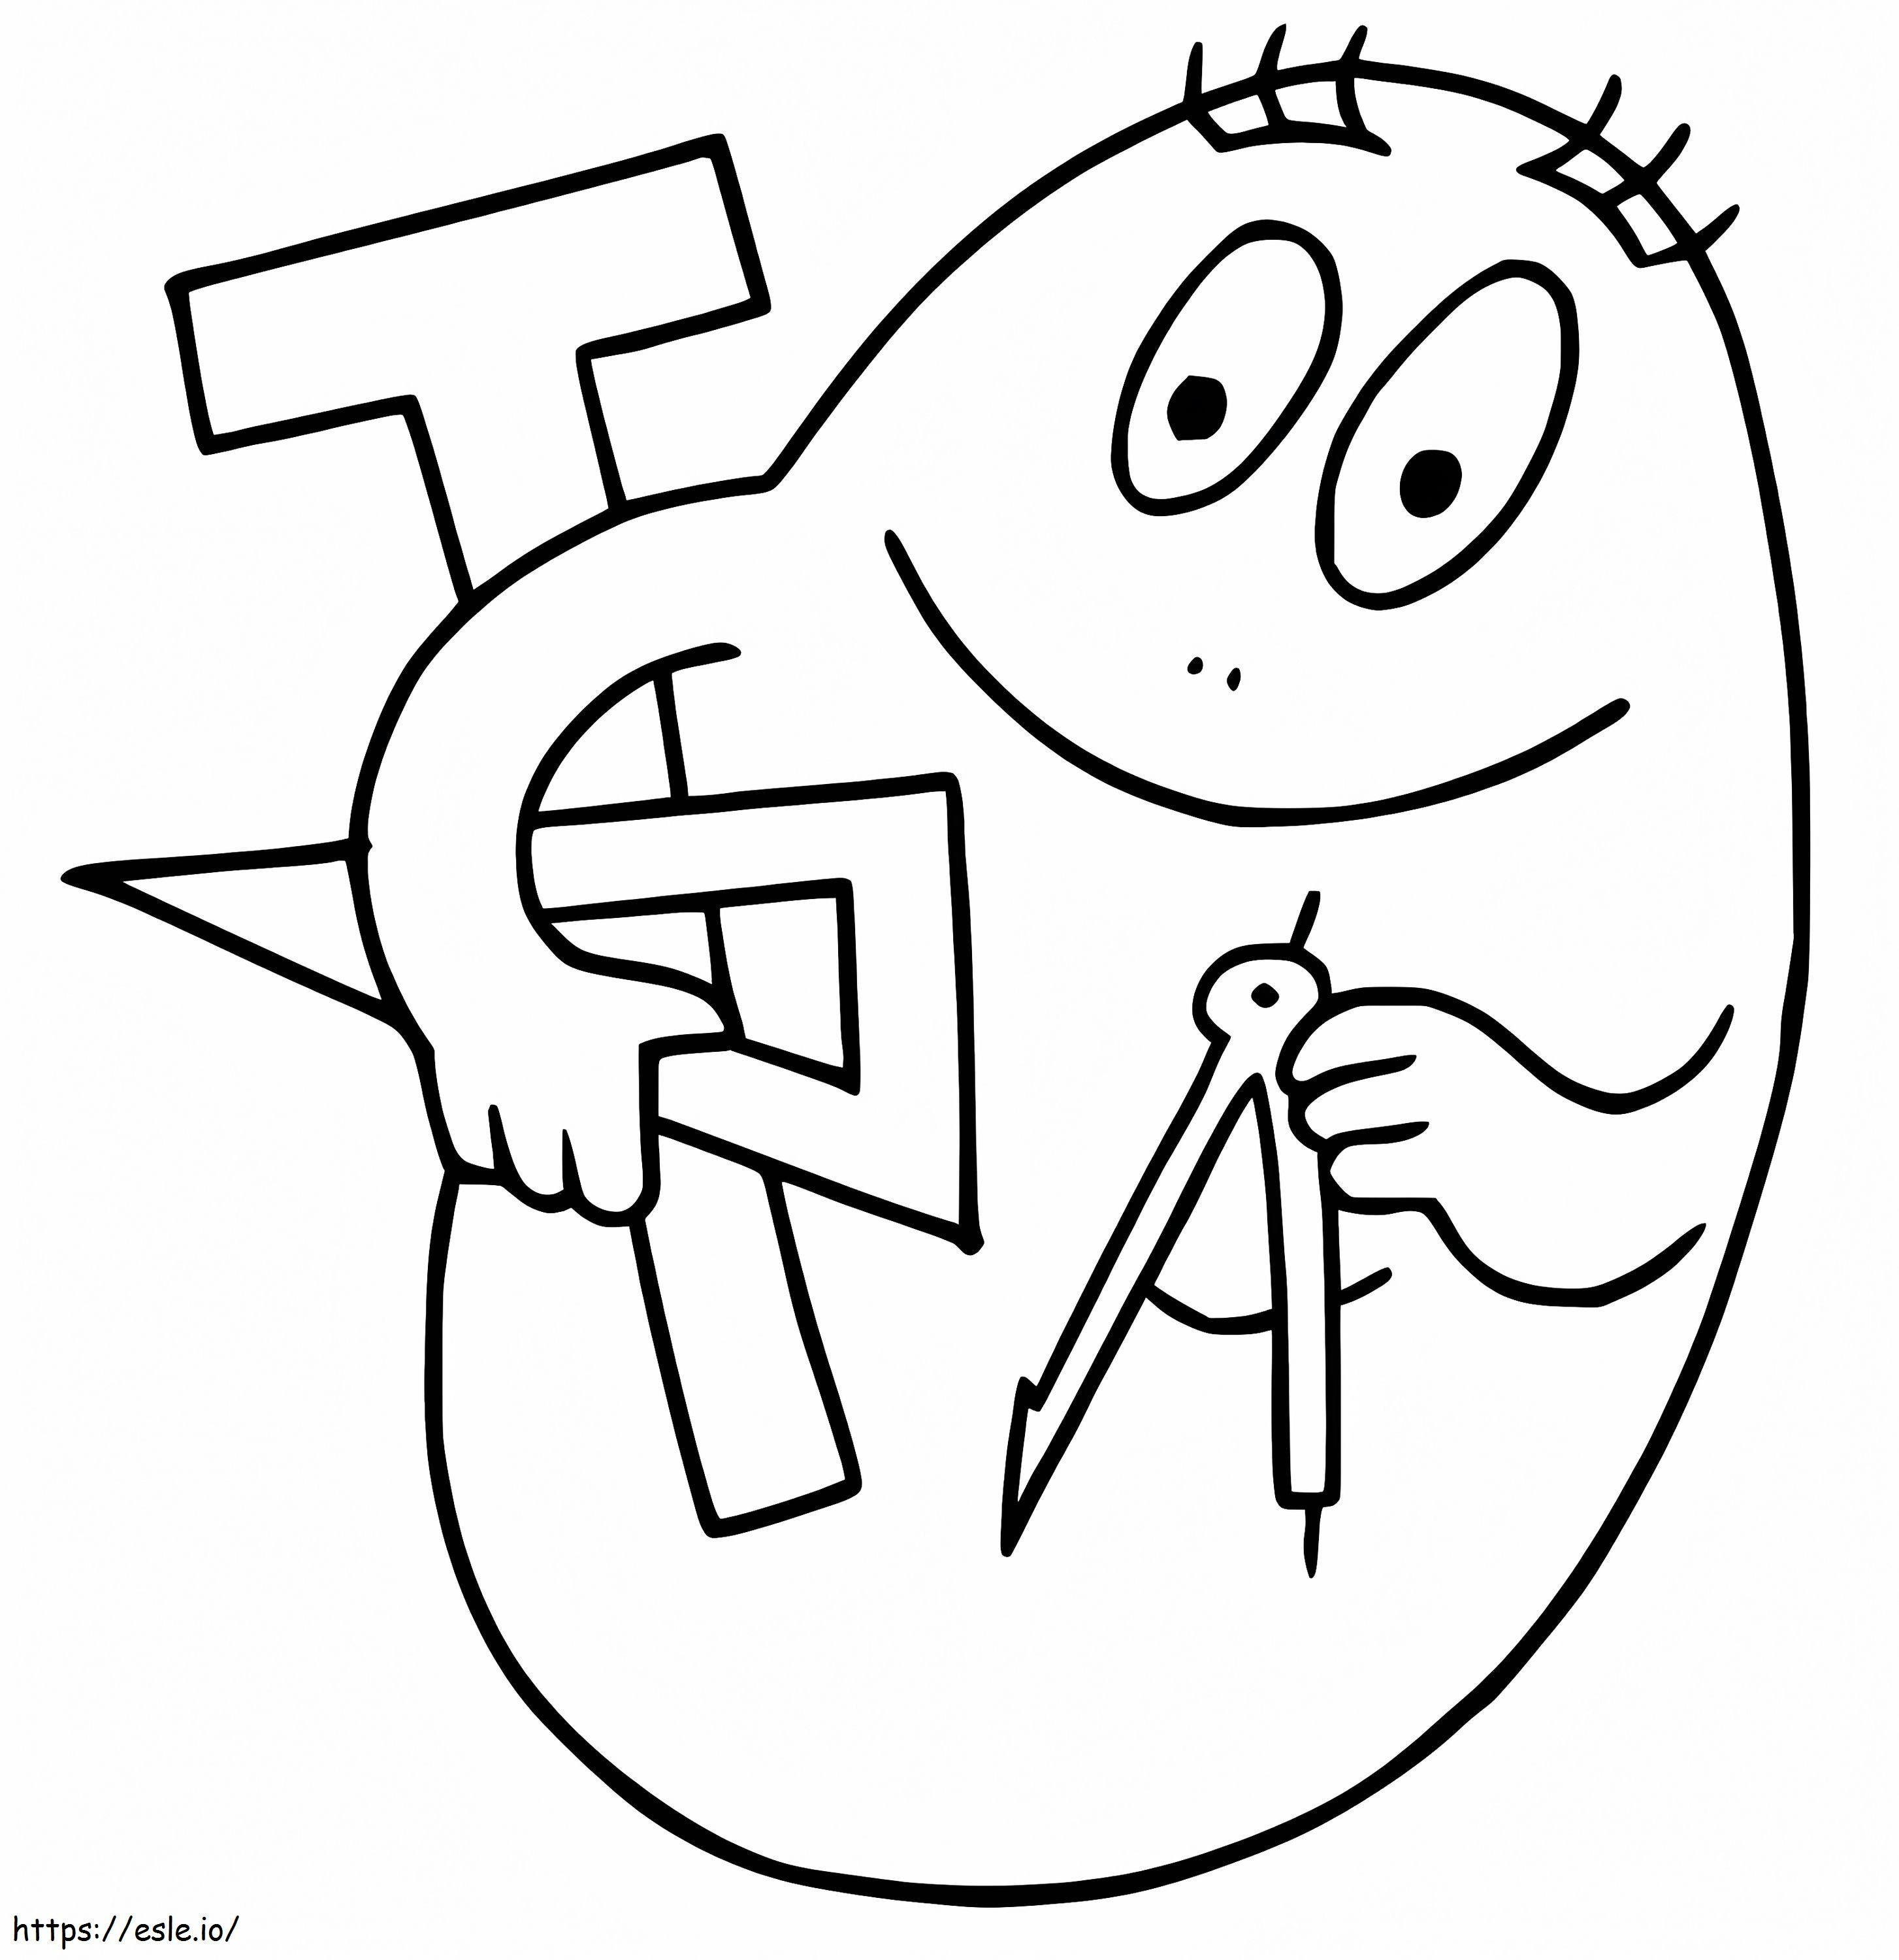 Barbabright coloring page